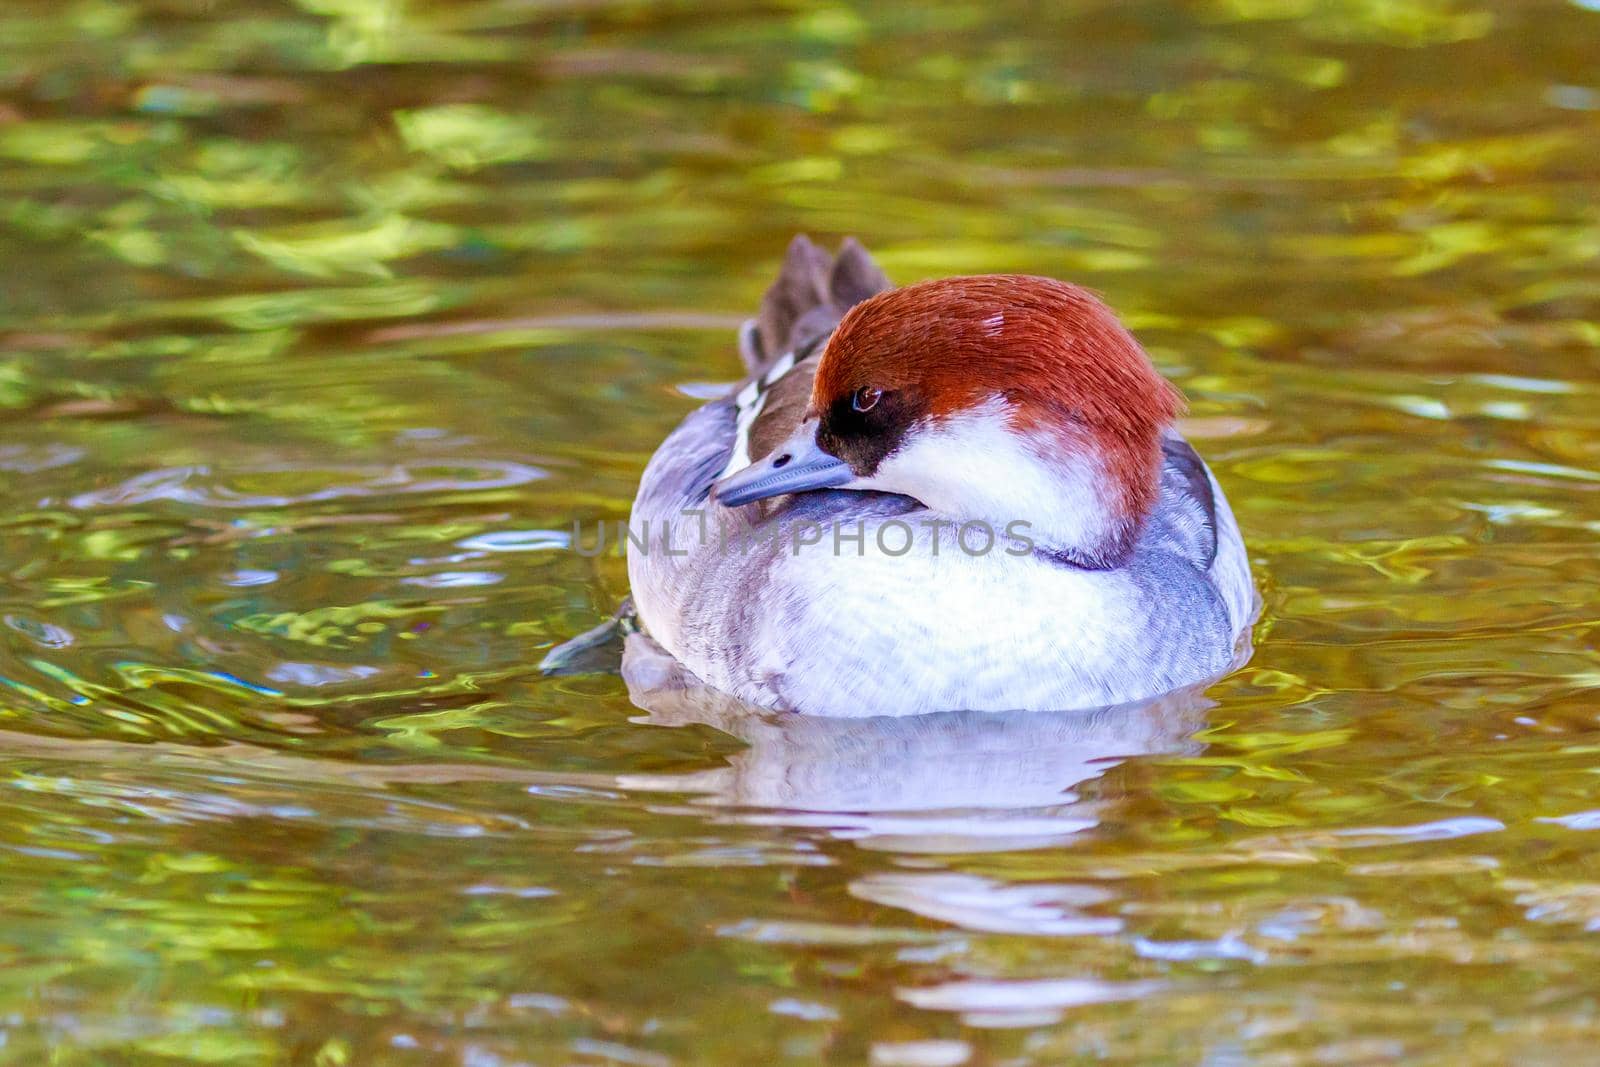 A Female Smew Duck swims on the lake.